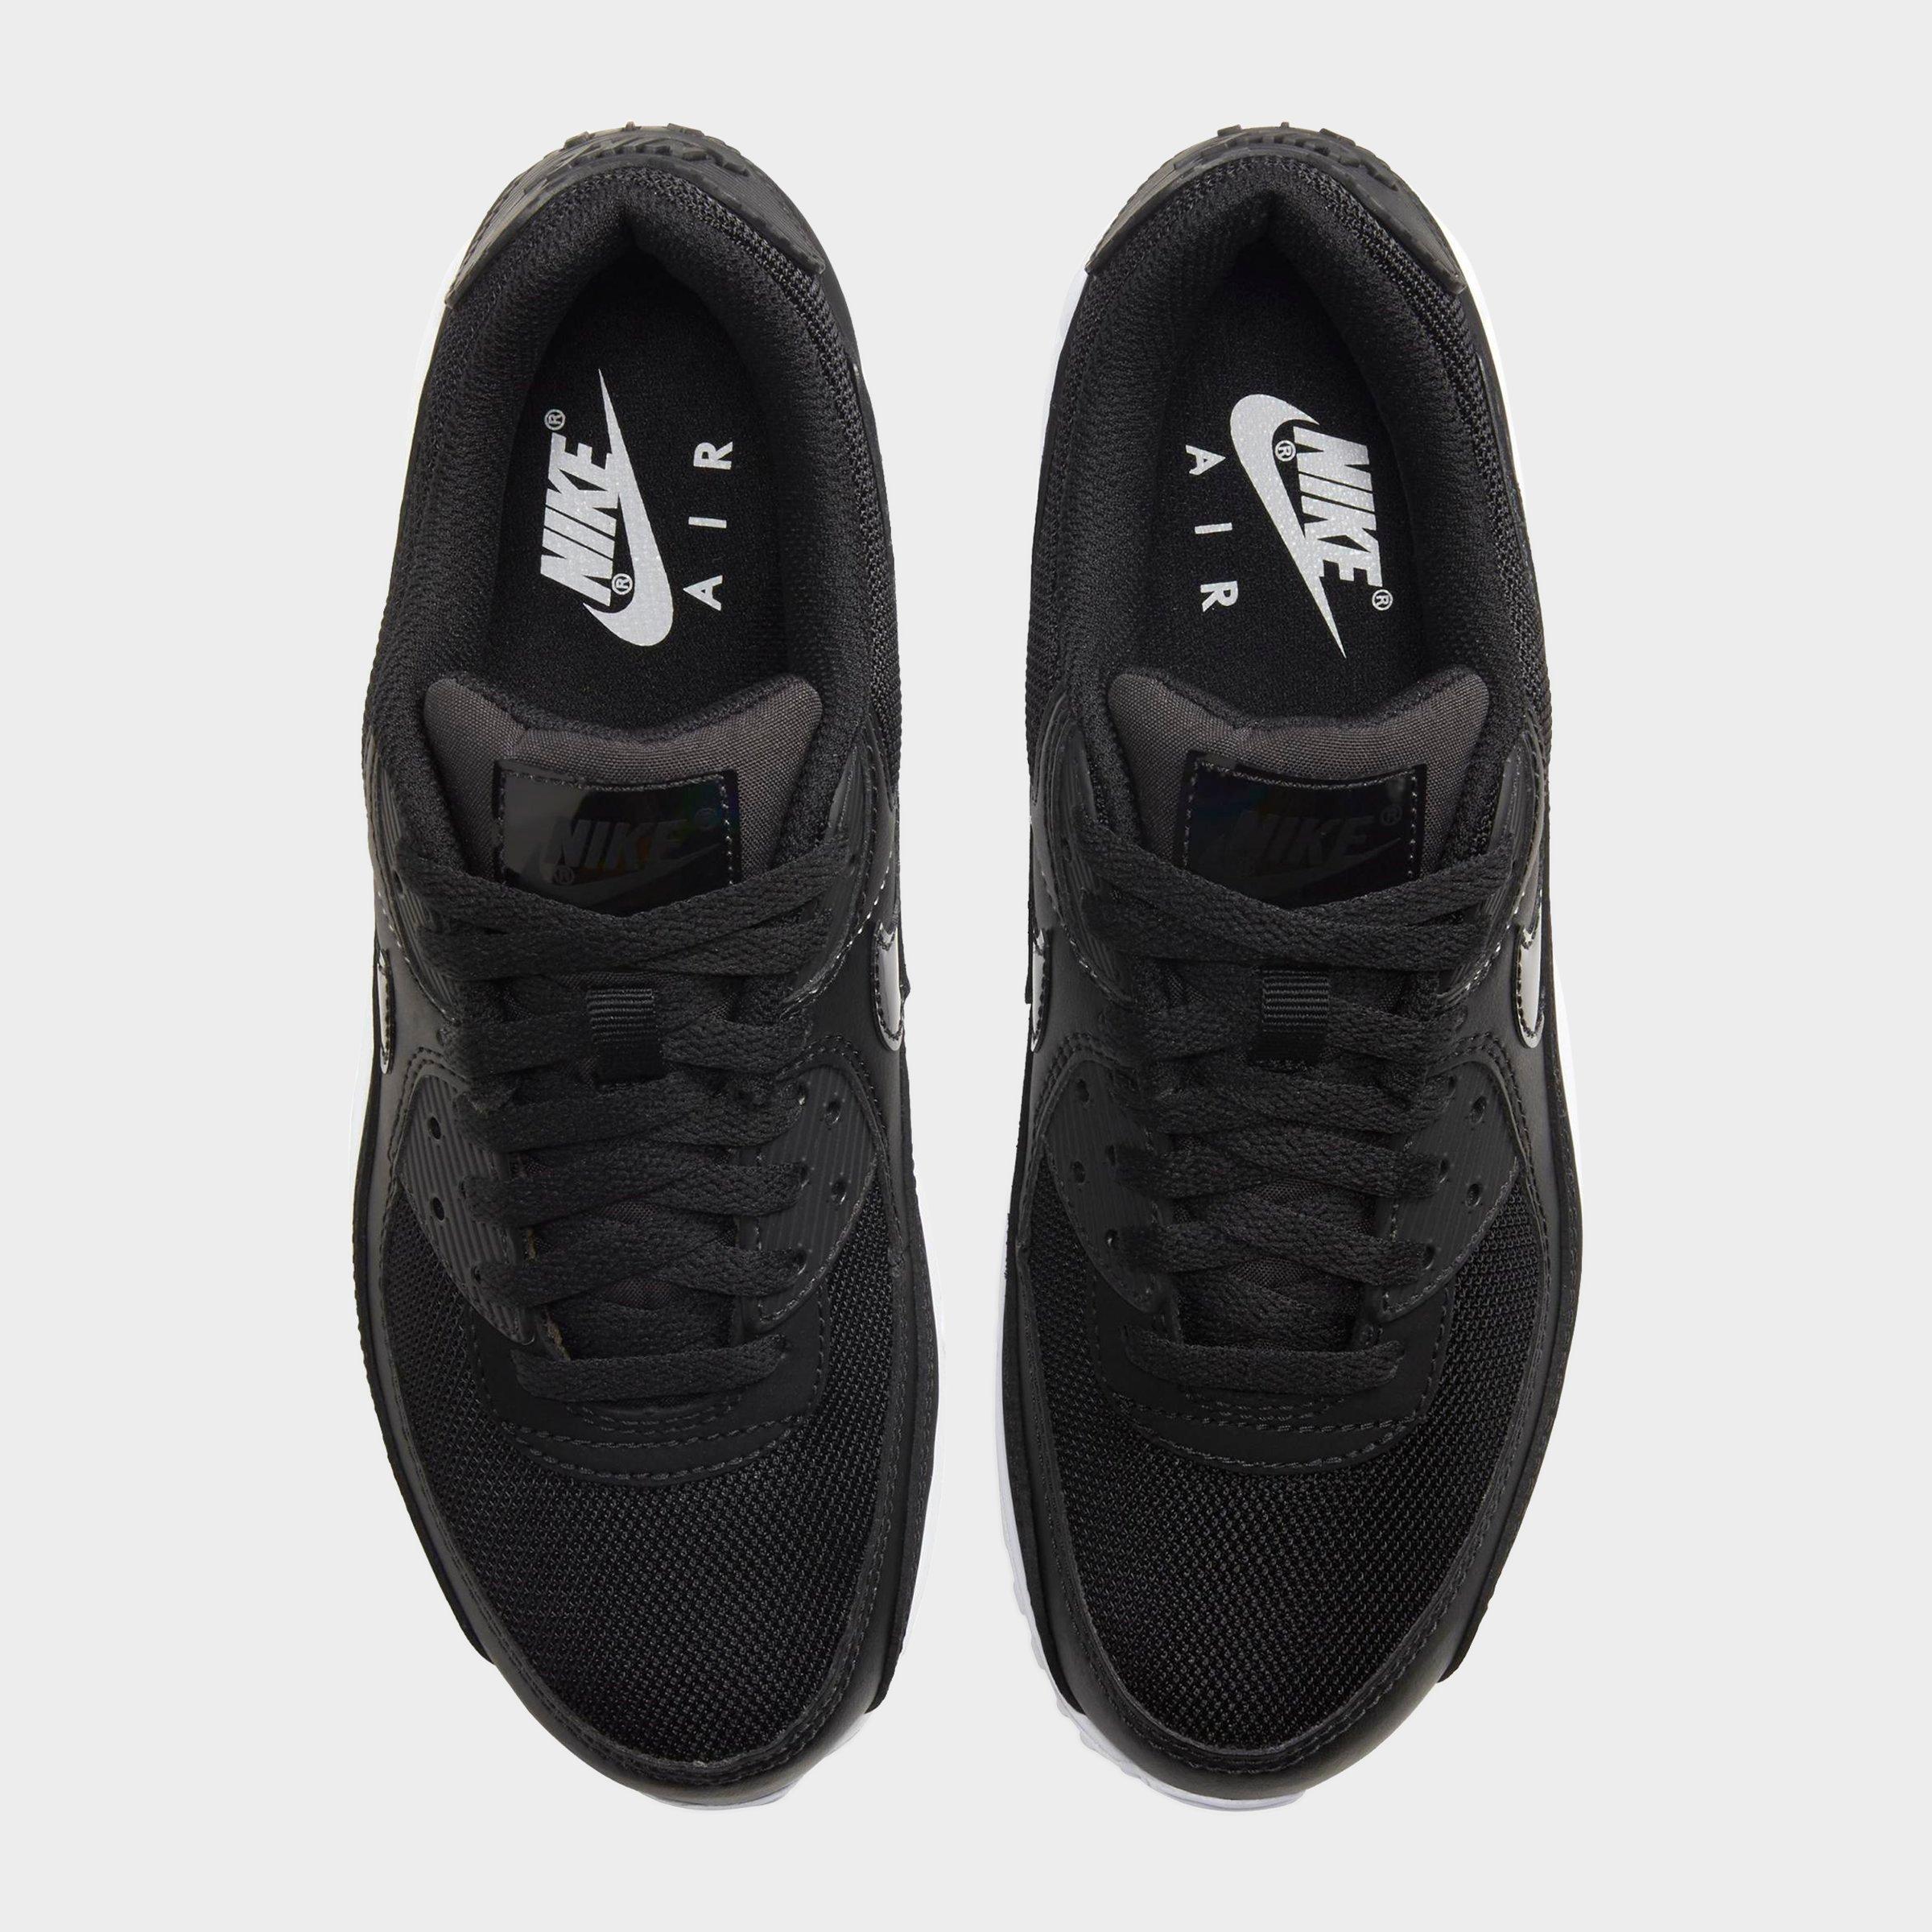 solid black nike womens shoes